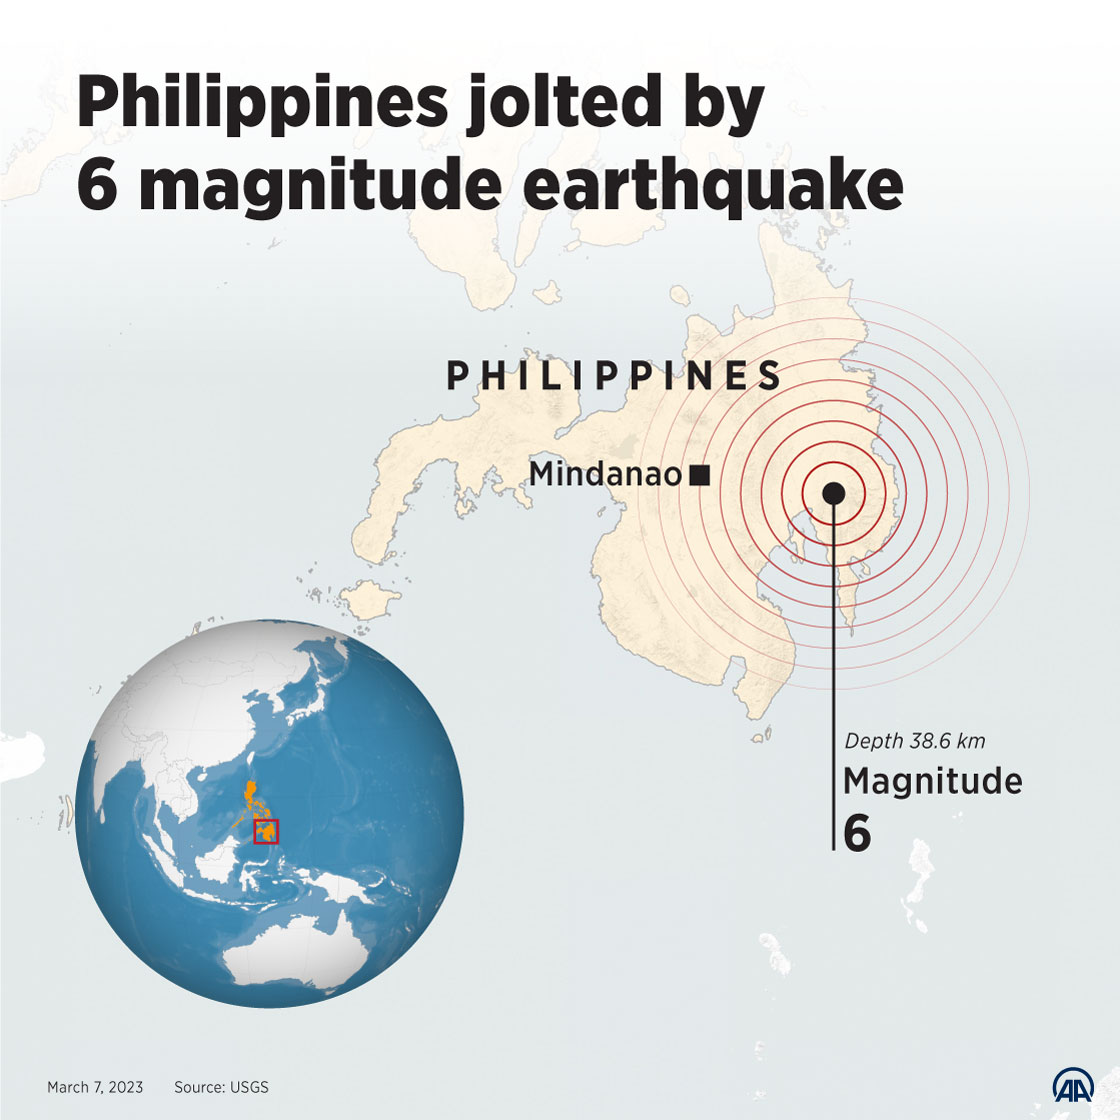 Philippines jolted by 6 magnitude earthquake